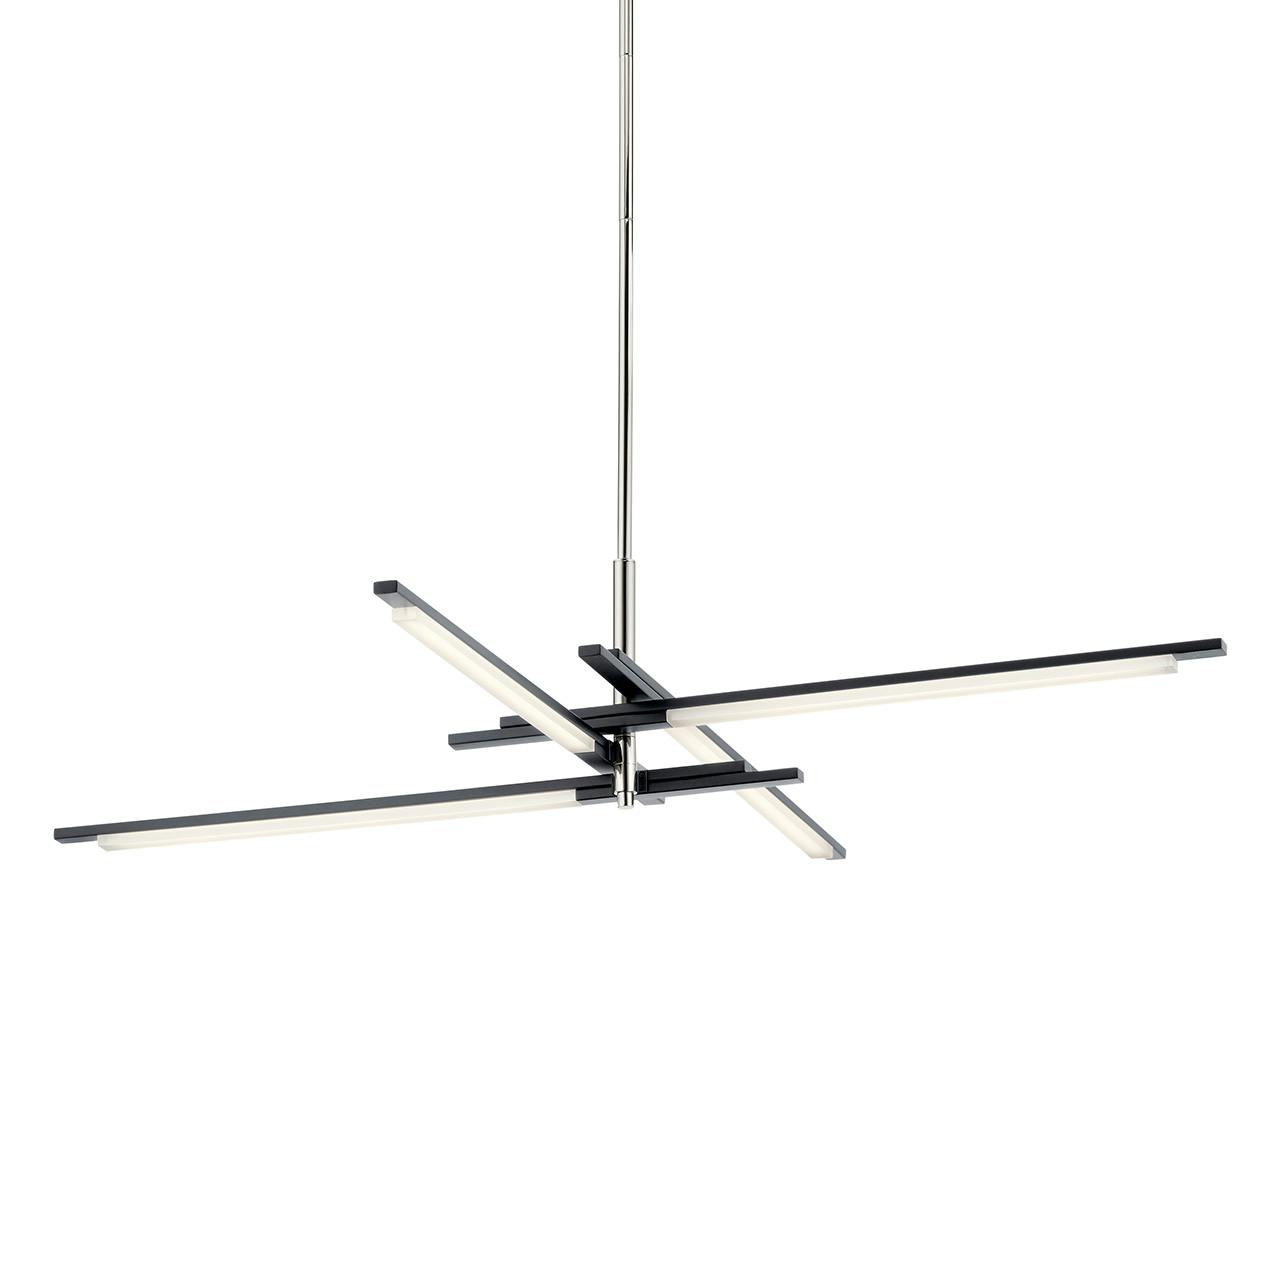 Charter LED 3000K 40.25" Pendant Black without the canopy on a white background